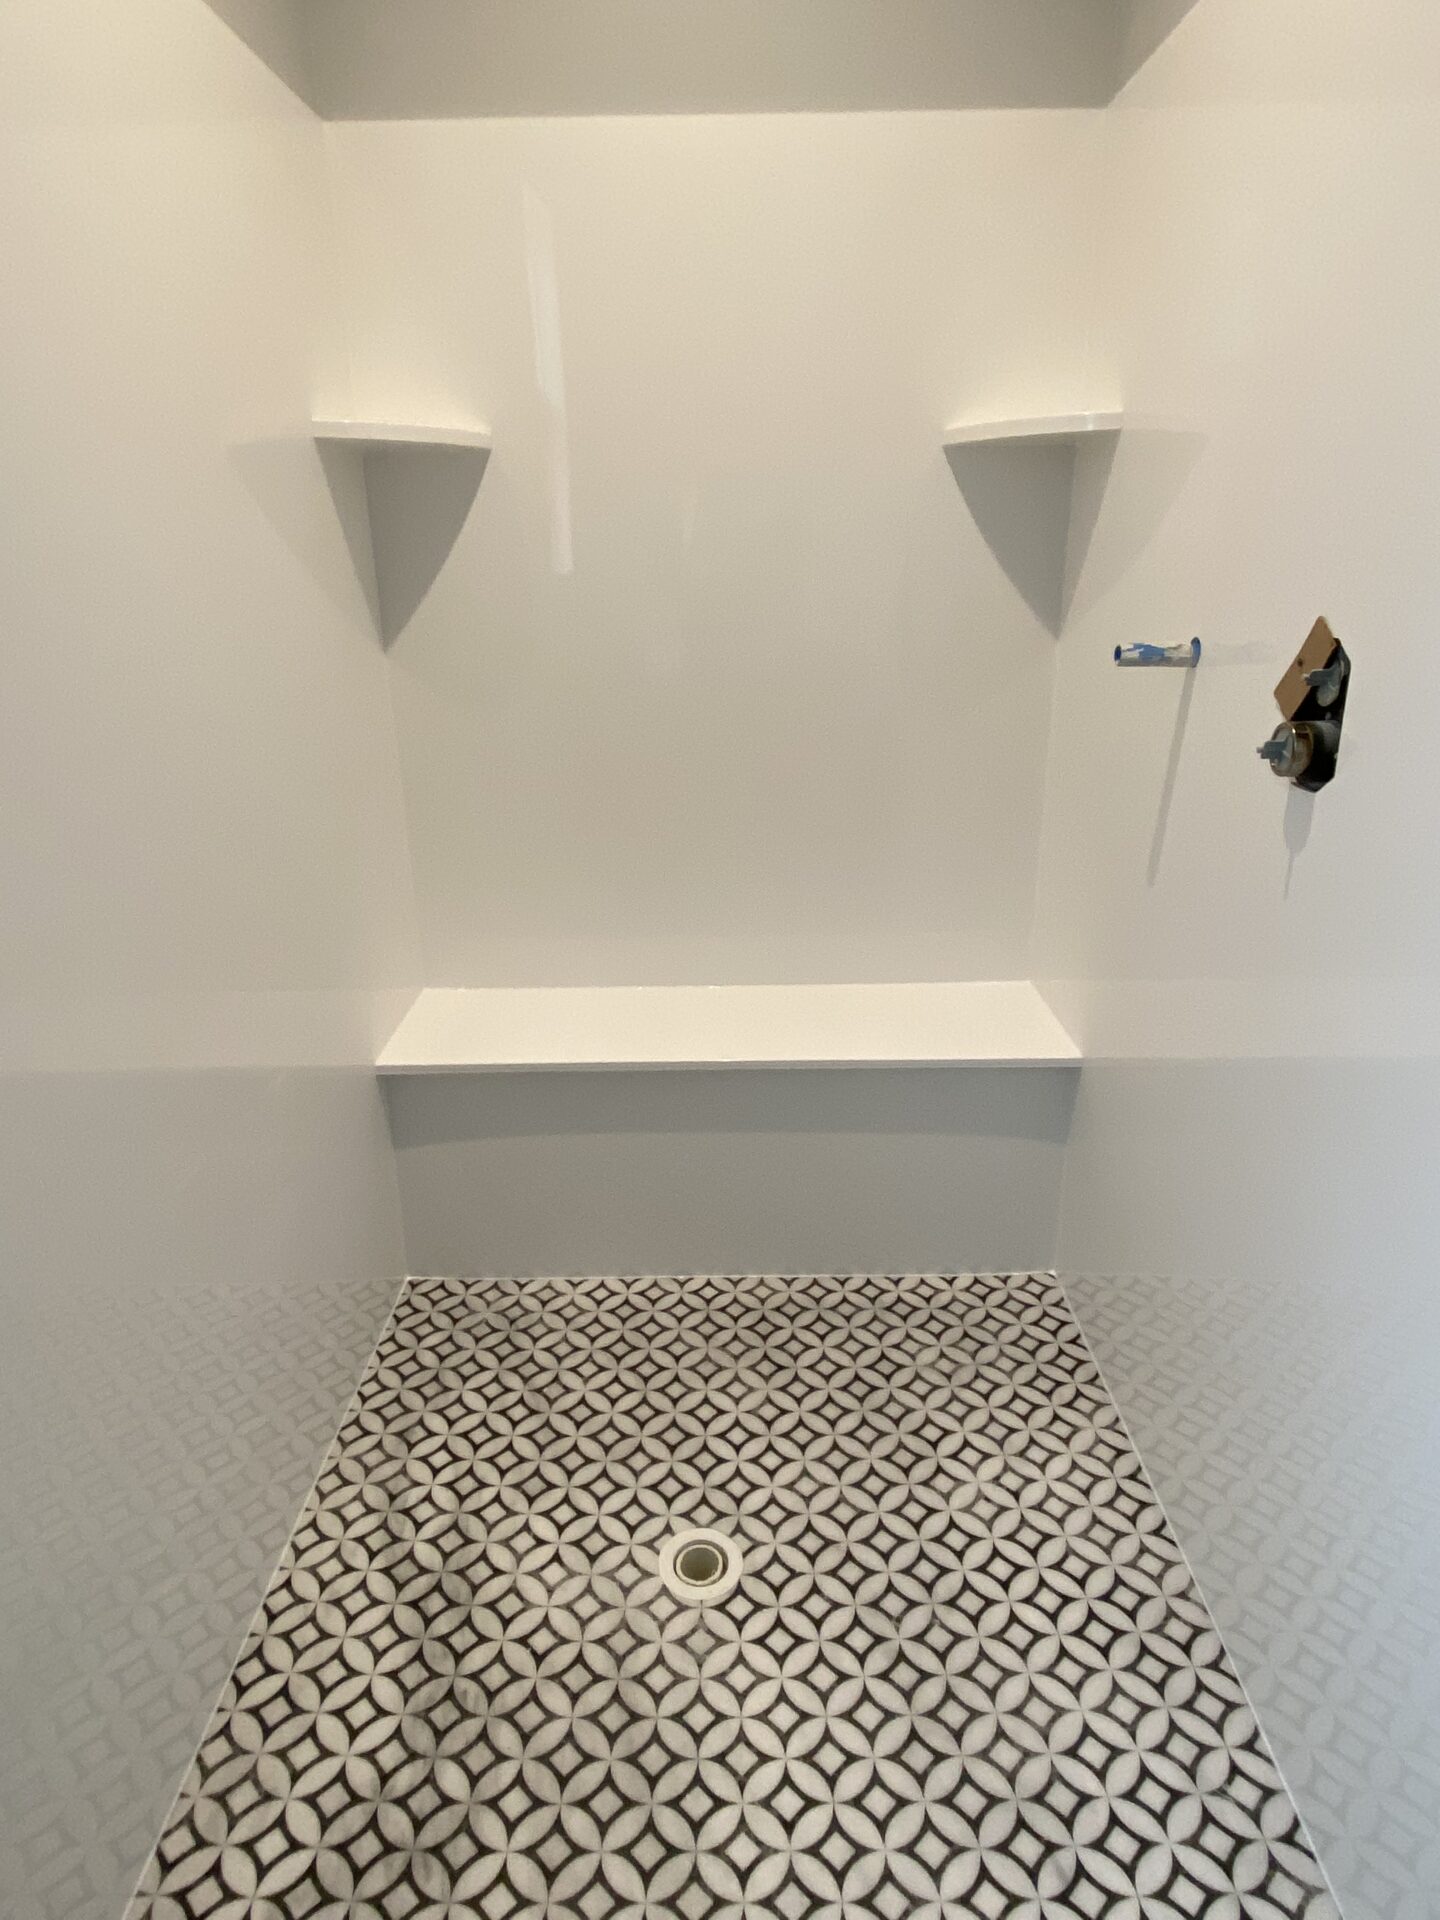 Tyvarian Polaris Shower Floor with solid surface shower walls. Contact AMI in Canton, Ohio.